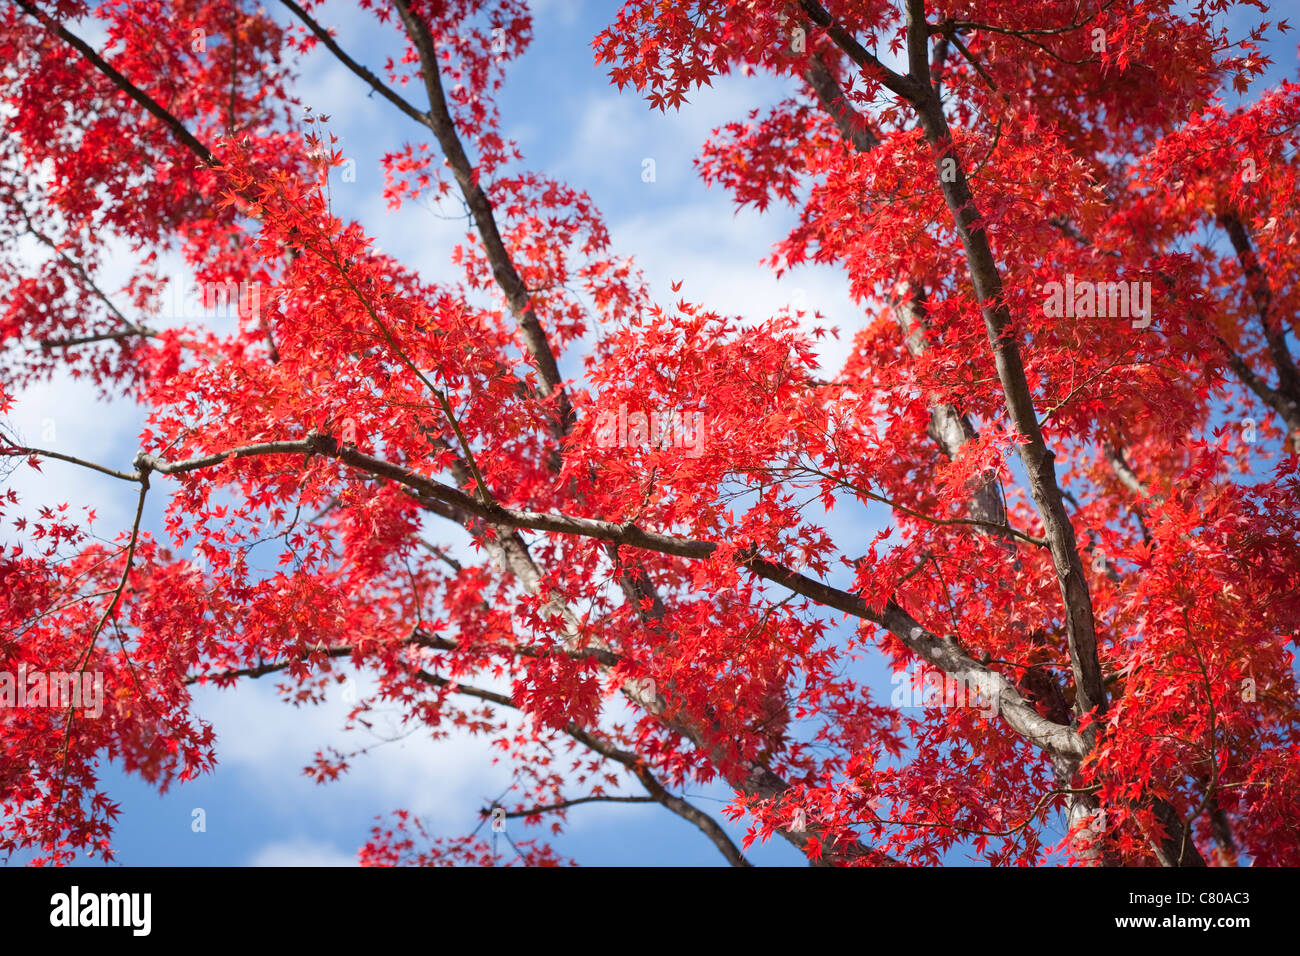 Red maple tree Stock Photo by ©Dr.PAS 55500911